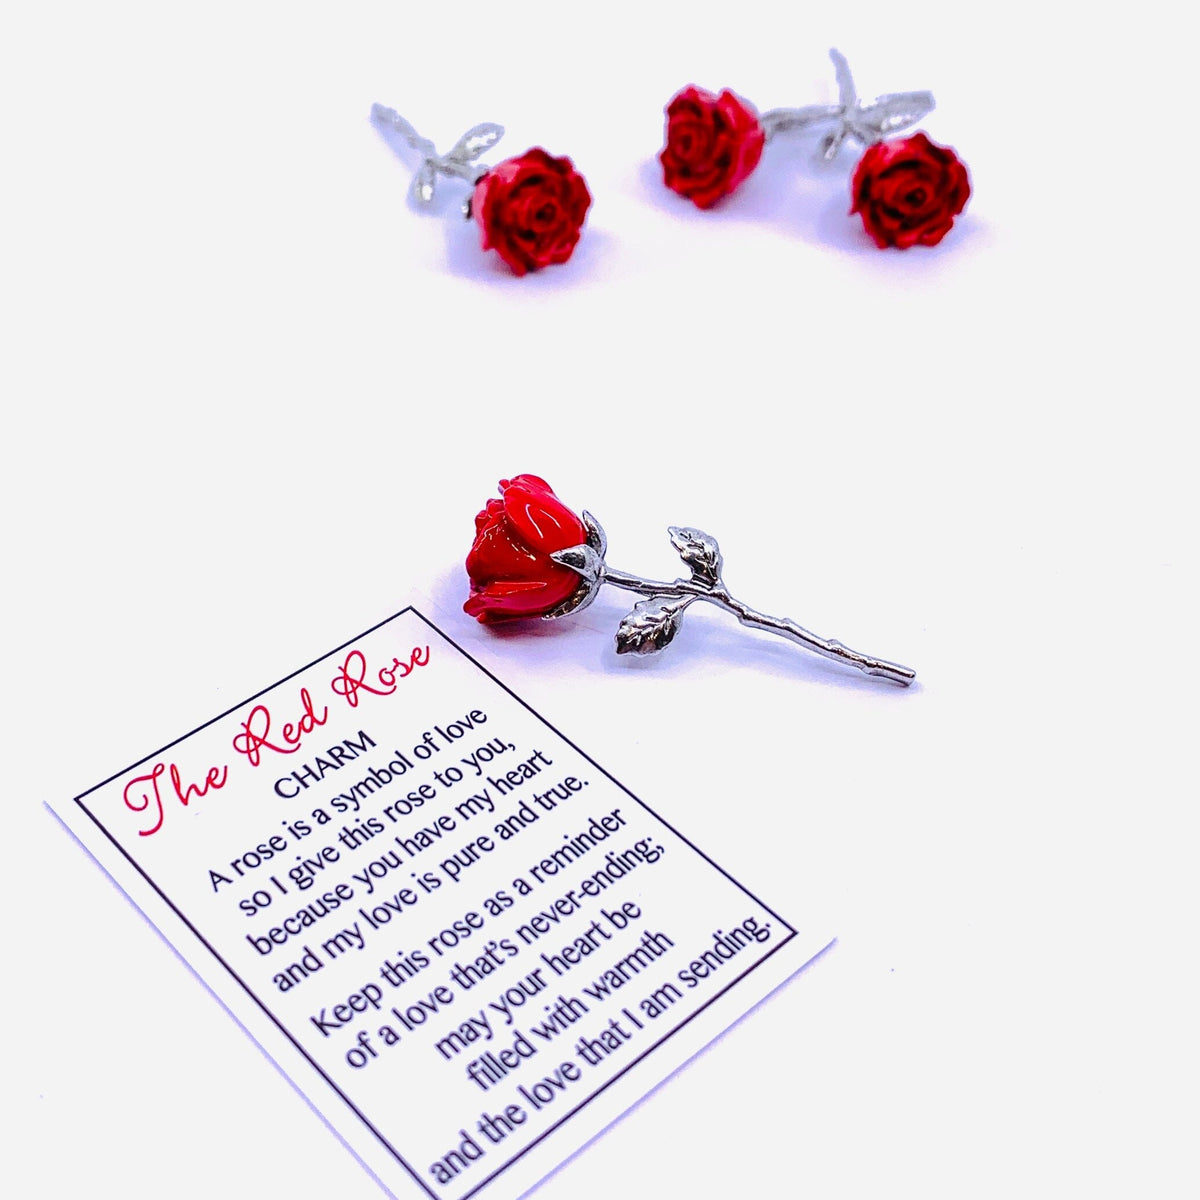 The Red Rose Pocket Charm Miniature GANZ 